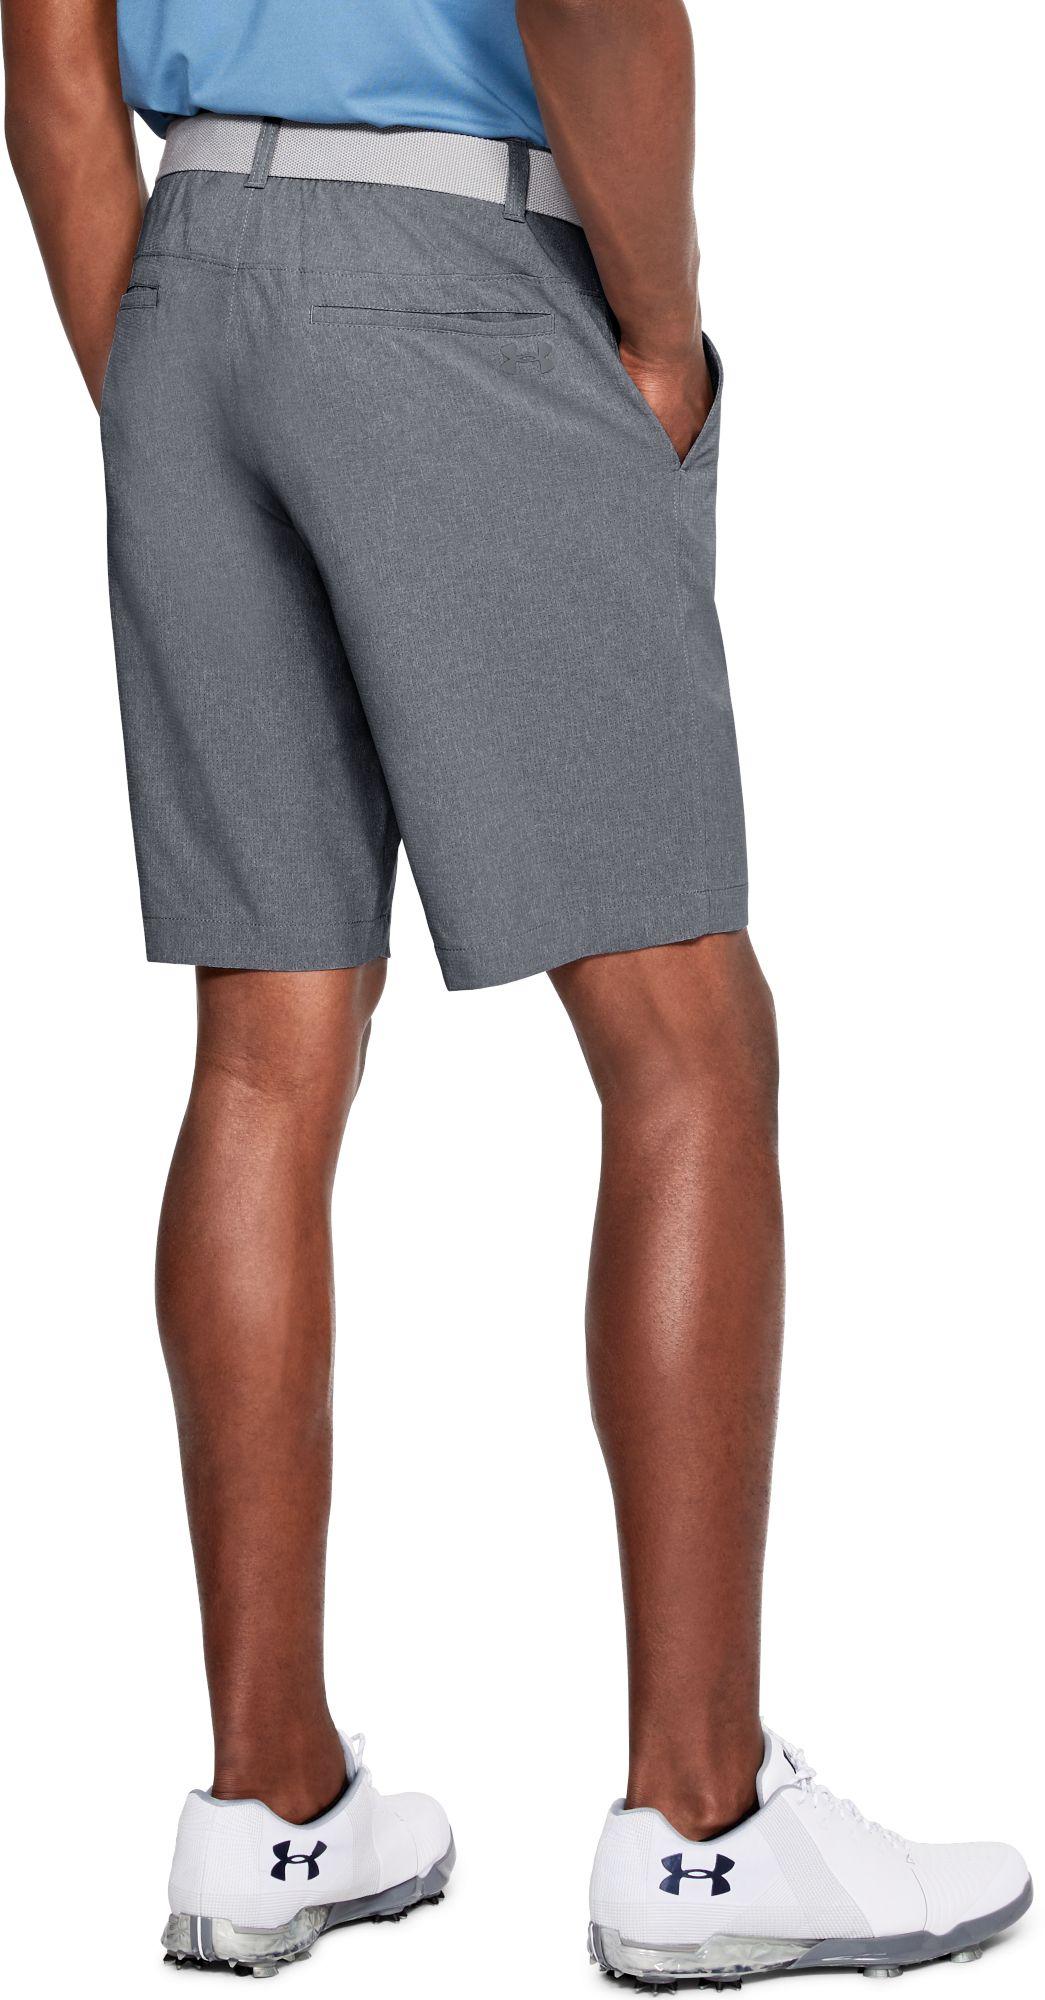 Under Armour Showdown Vented Golf Shorts in Zinc/Gray (Gray) for Men - Lyst